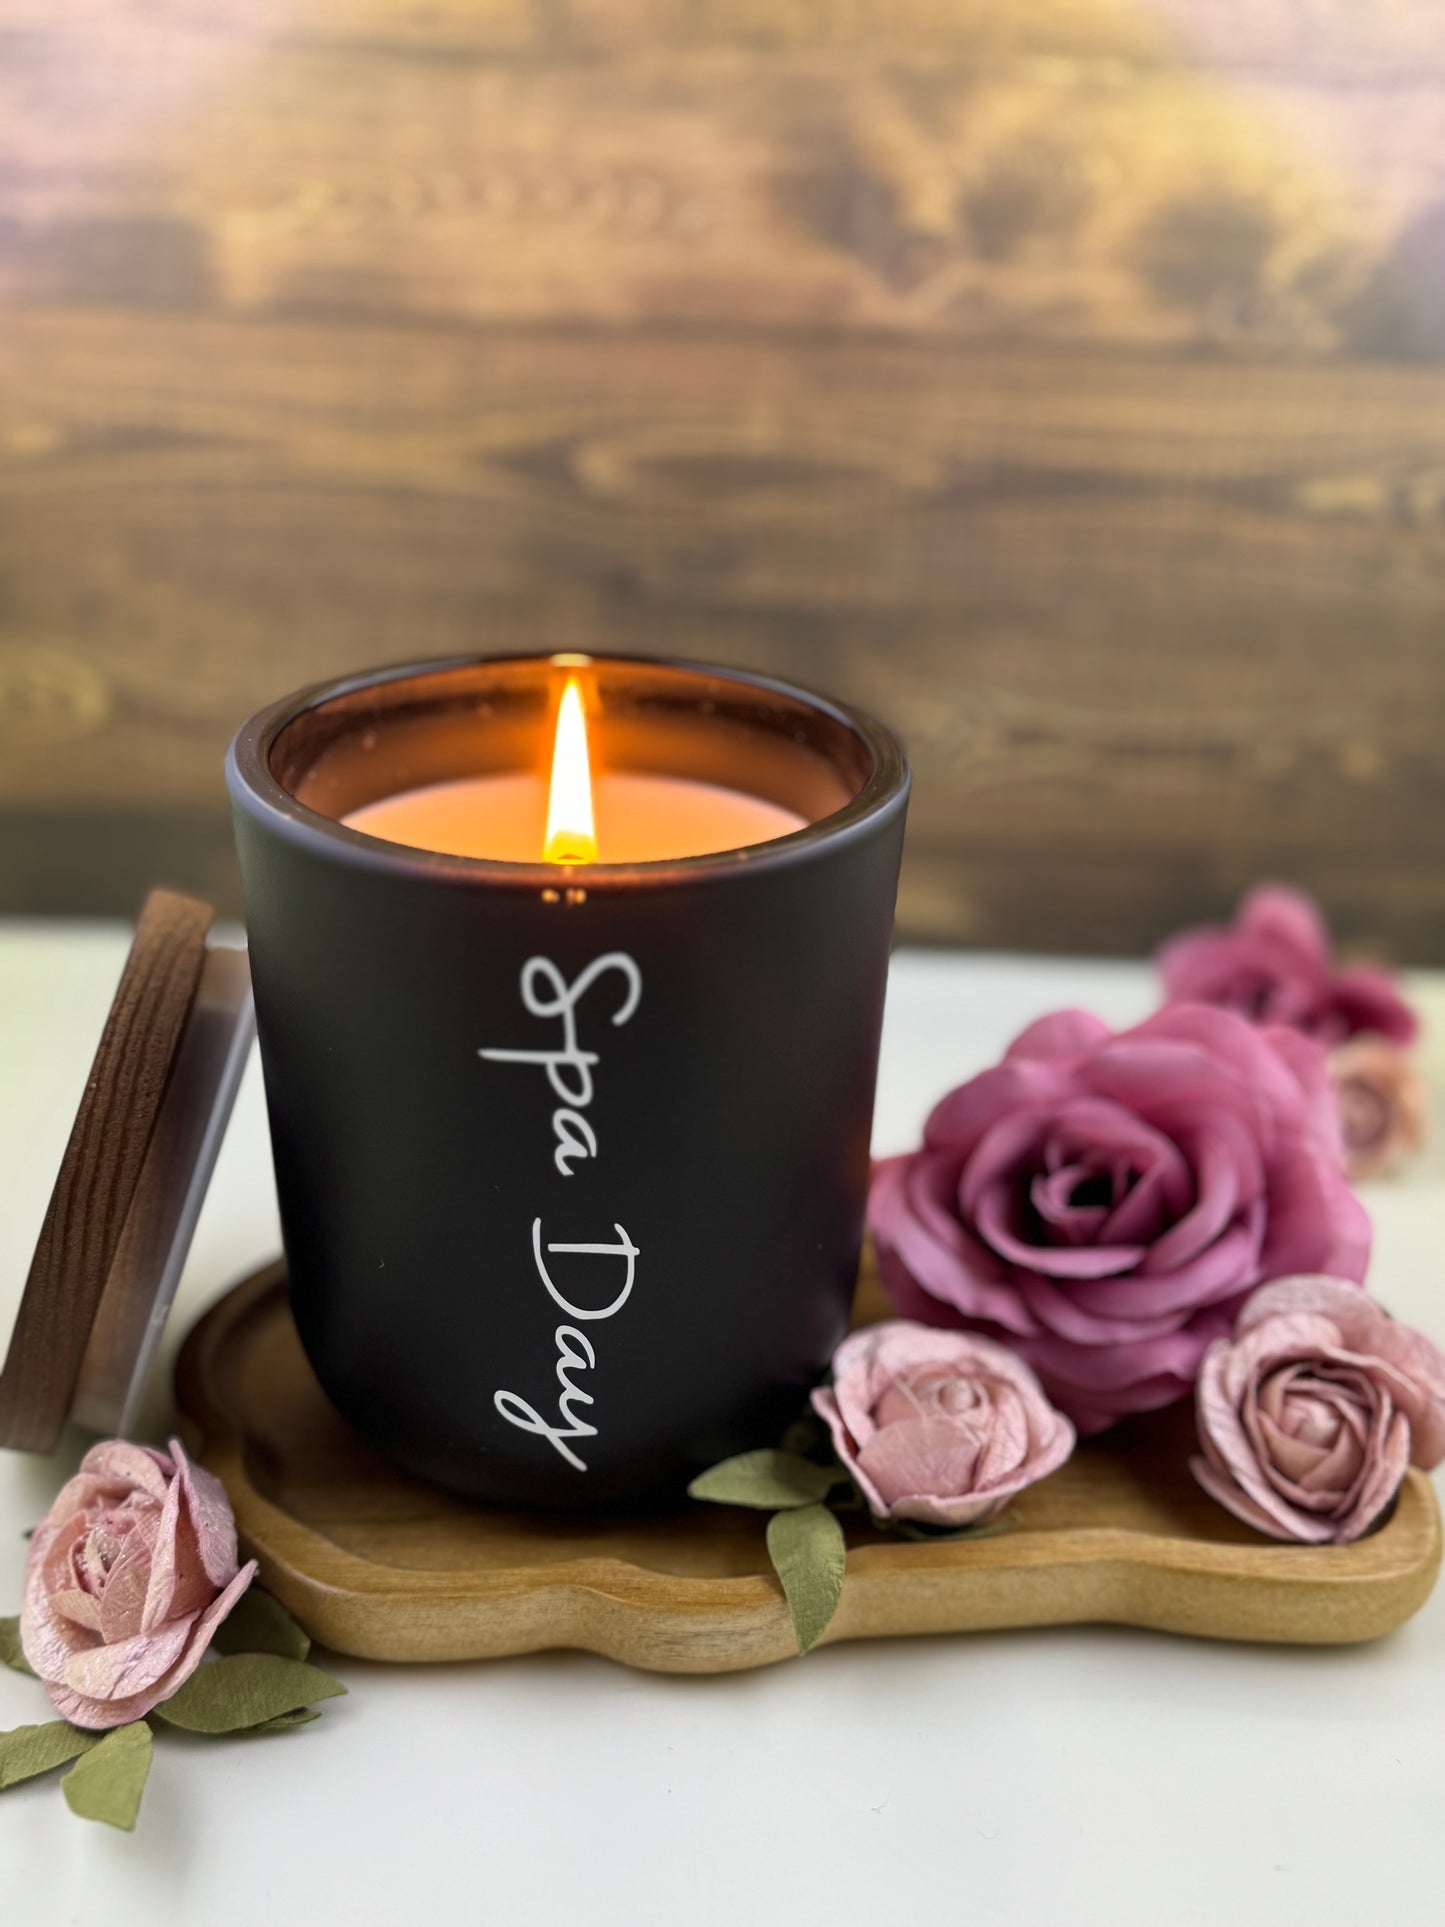 Aromatherapy 488 | Handcrafted | Spa Day Candle | Hand Poured Natural Soy Wax | High Quality Eco-Friendly | Luxury Tumbler | Aromatherapy Candle for Relaxation